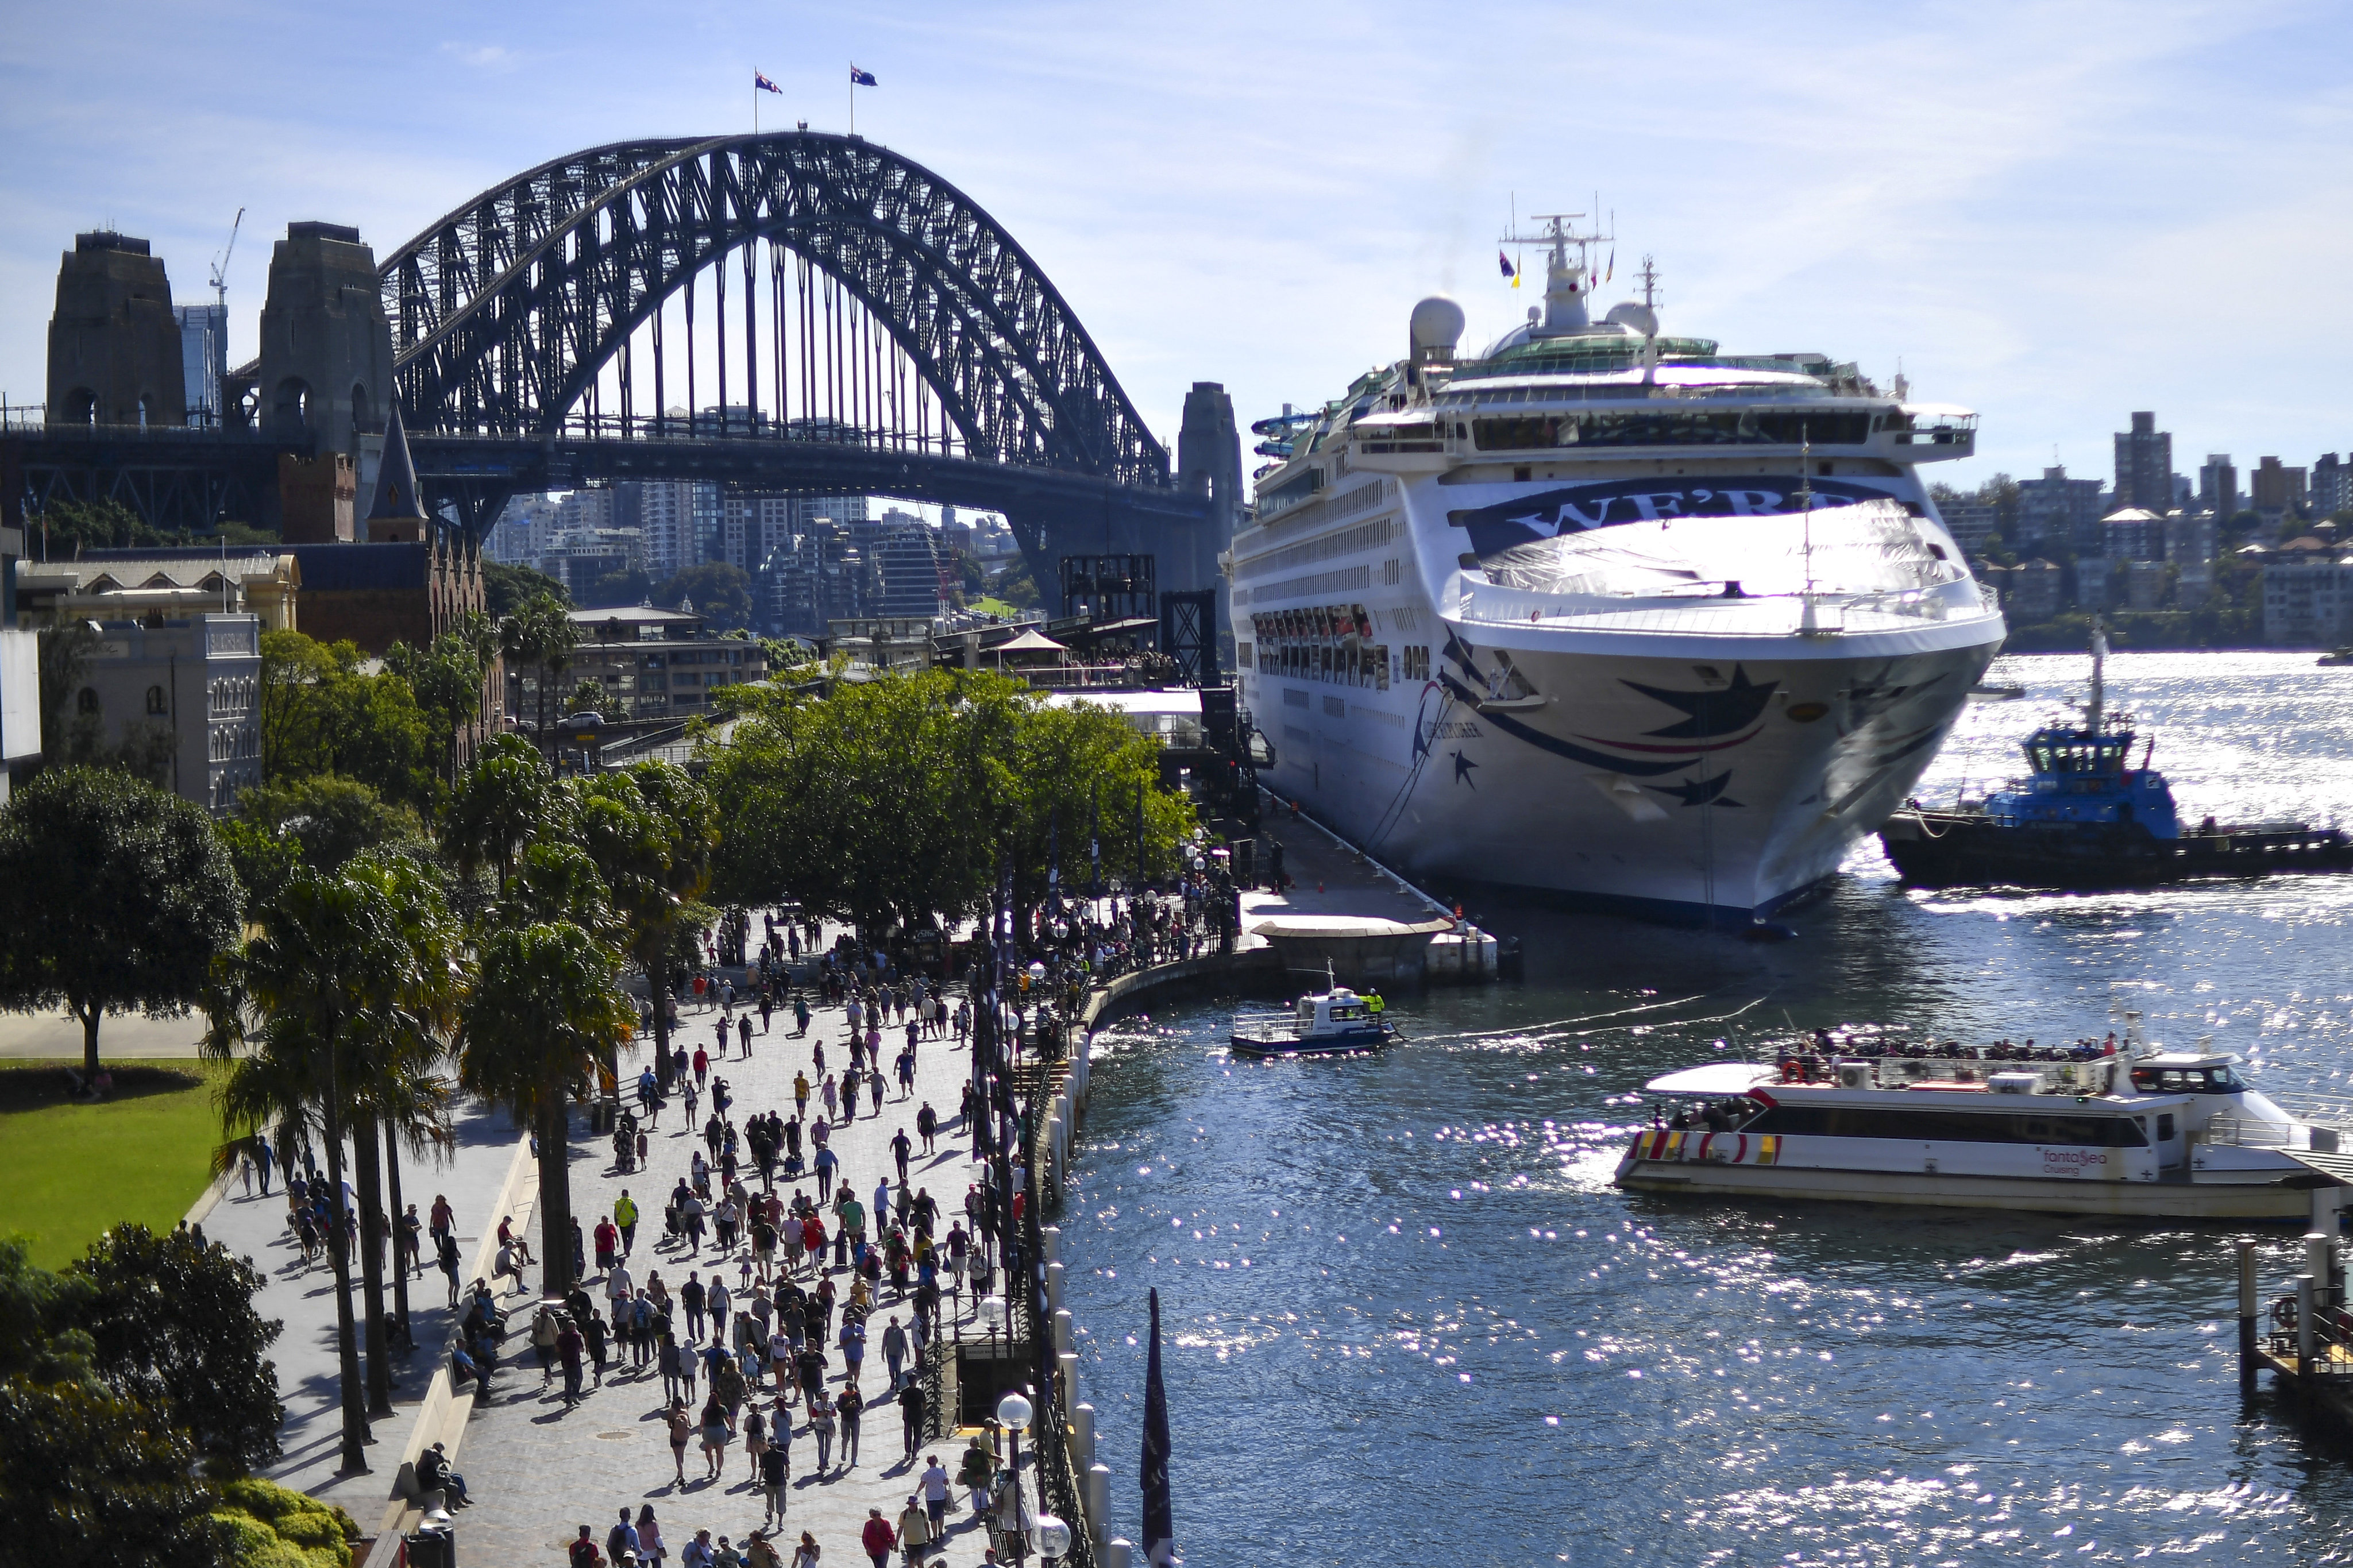 The Pacific Explorer makes its way to dock at the overseas passenger terminal on Sydney Harbour on April 18, 2022. Photo: AFP